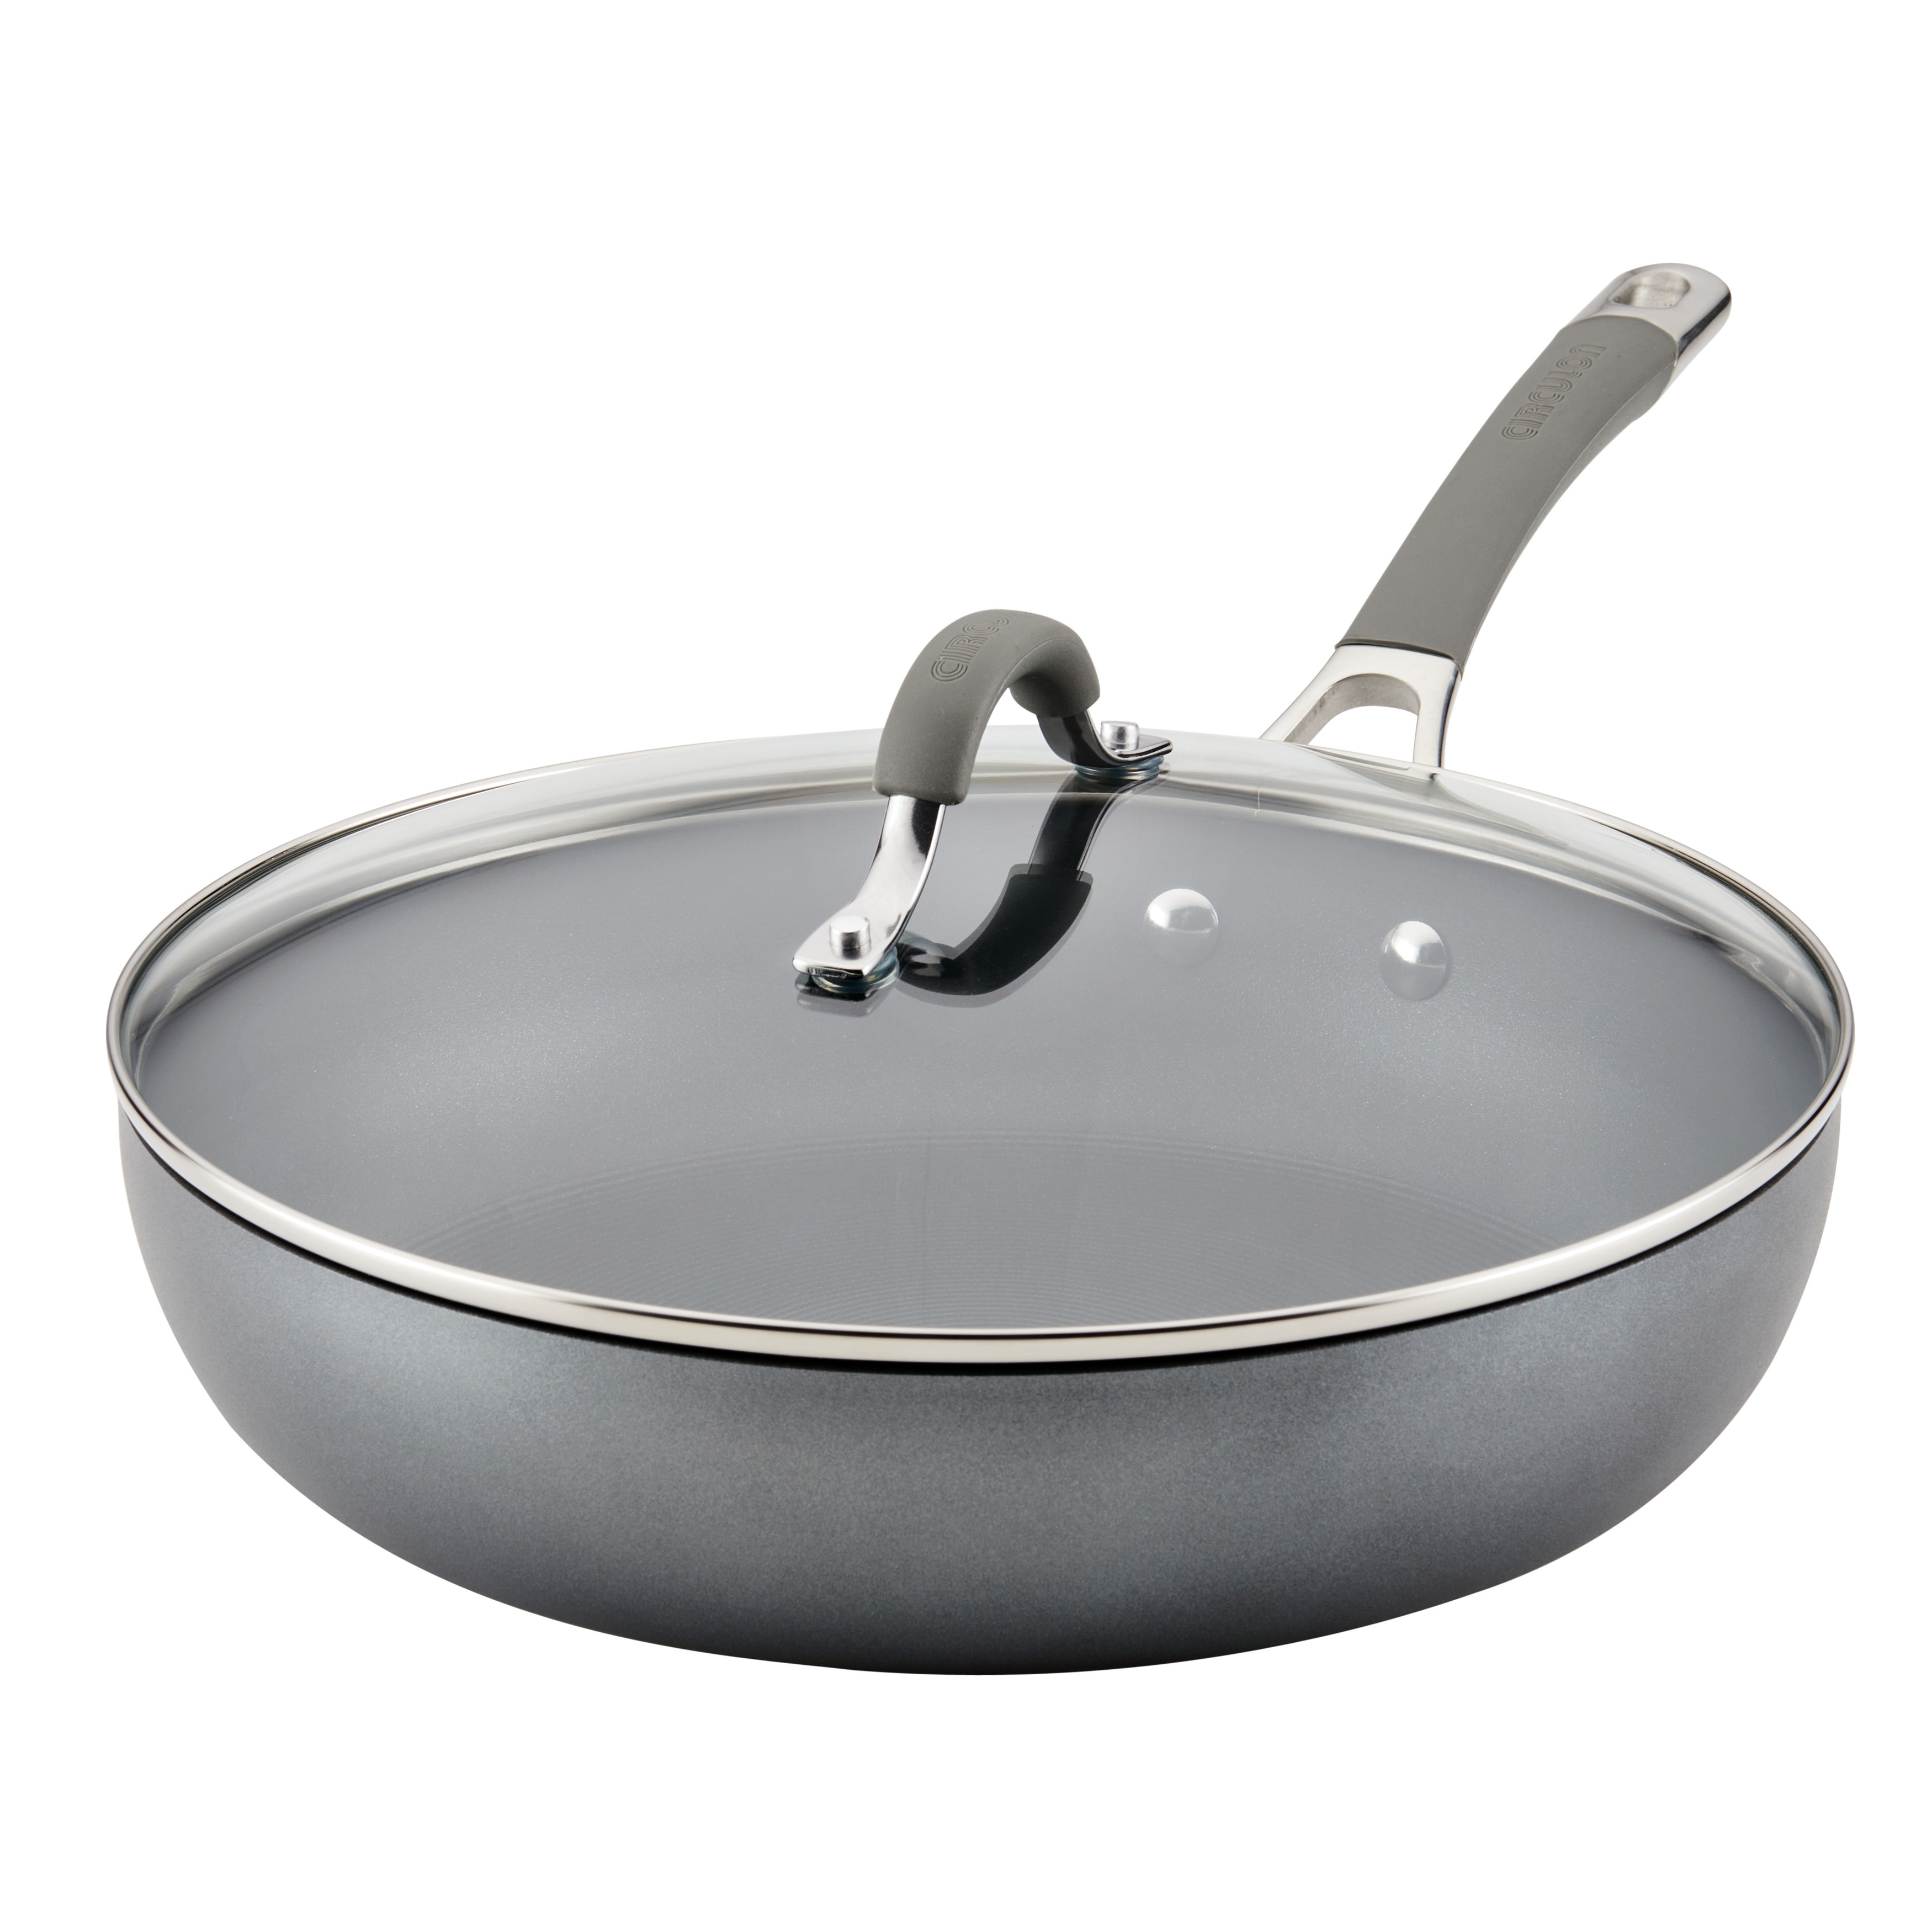 https://ak1.ostkcdn.com/images/products/is/images/direct/16901d8a65a2e6ed42bd04e4a47c5d8d19ffeb58/Circulon-Elementum-Hard-Anodized-Nonstick-Deep-Frying-Pan-with-Lid%2C-12-Inch%2C-Gray.jpg